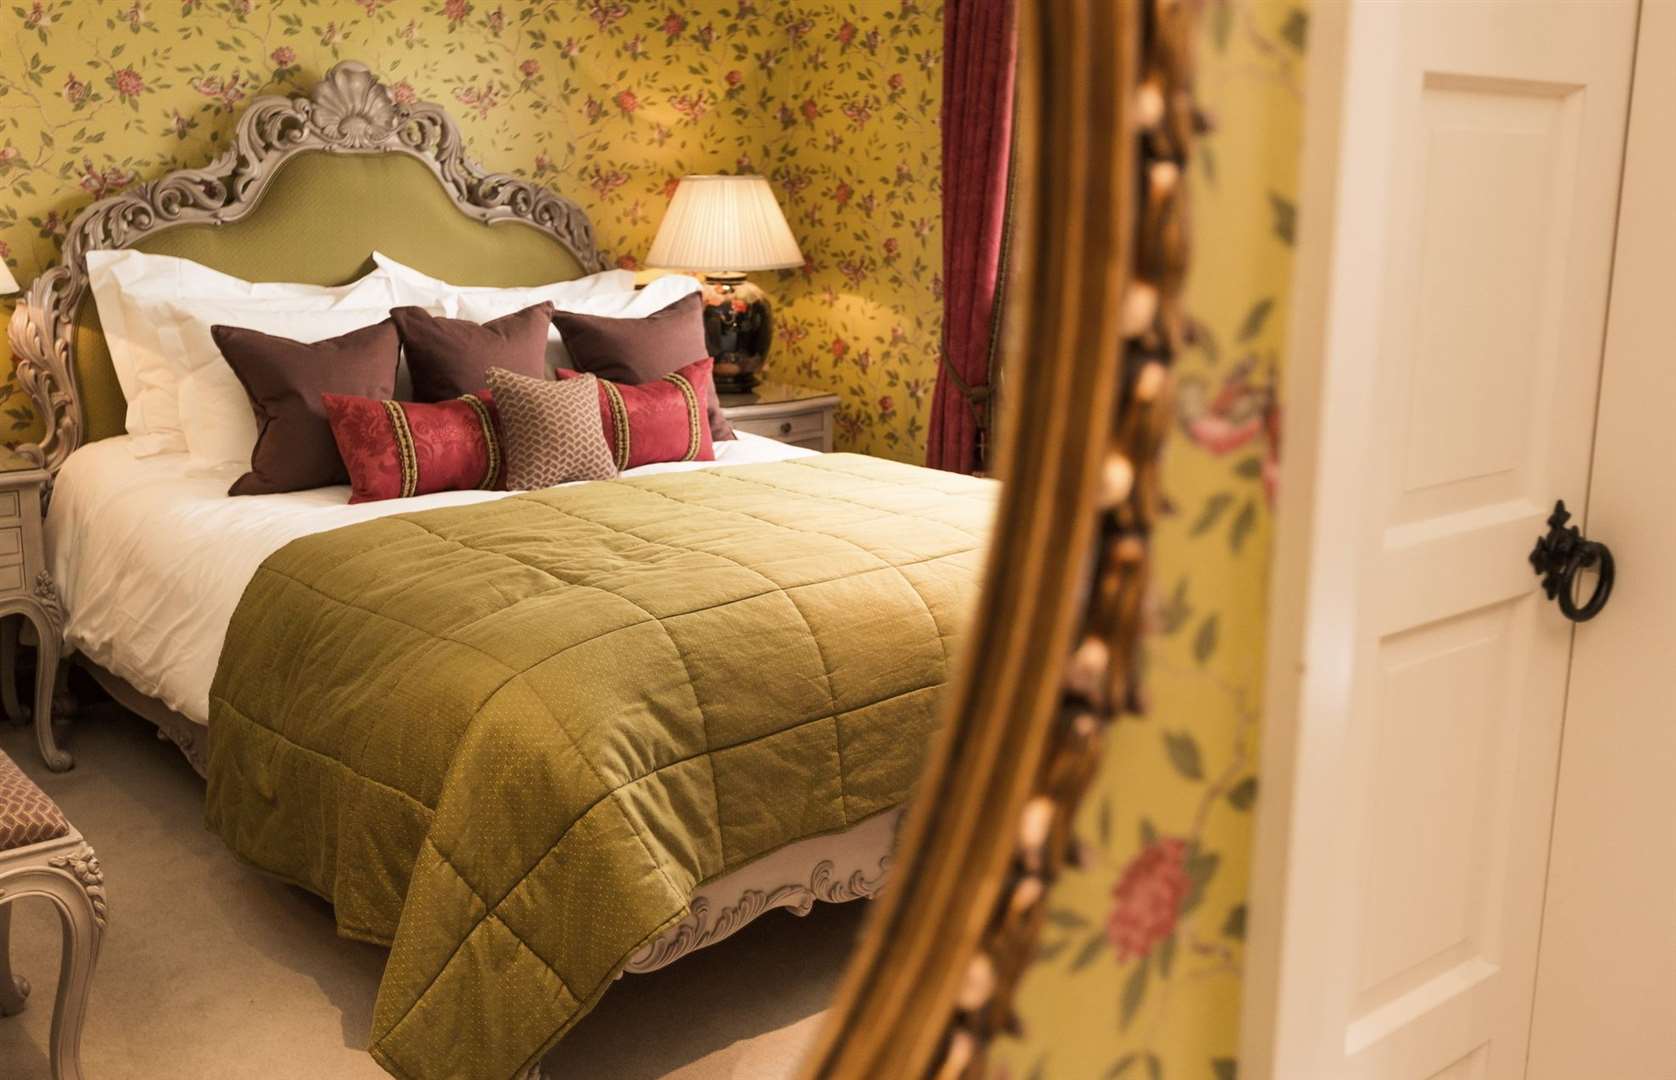 Destination Kent includes details of top spots to stay at in Kent, including Hever Castle B&B